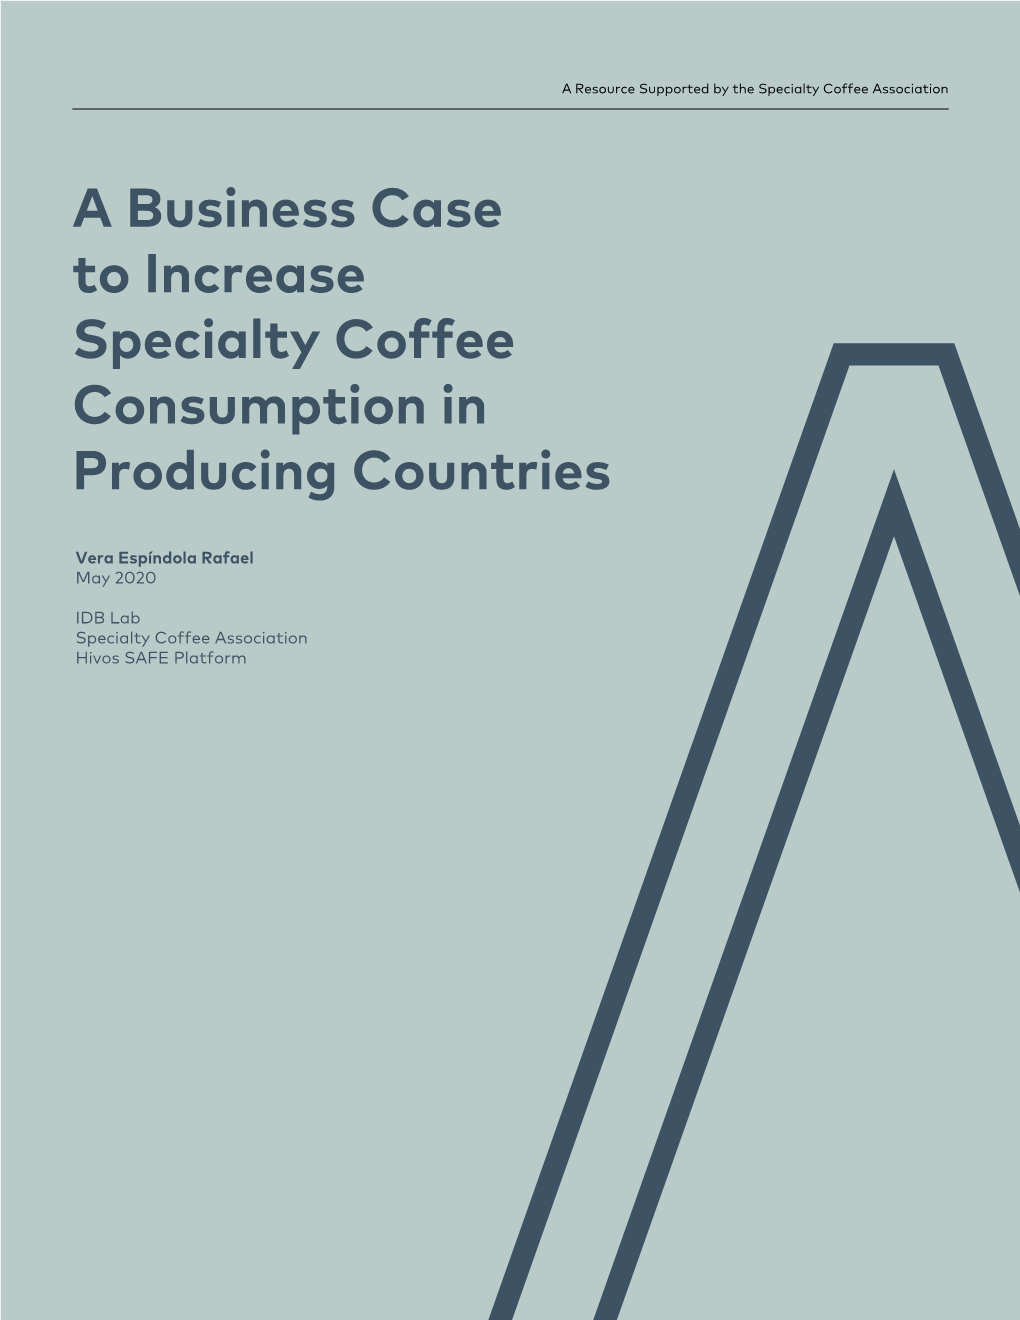 A Business Case to Increase Specialty Coffee Consumption in Producing Countries